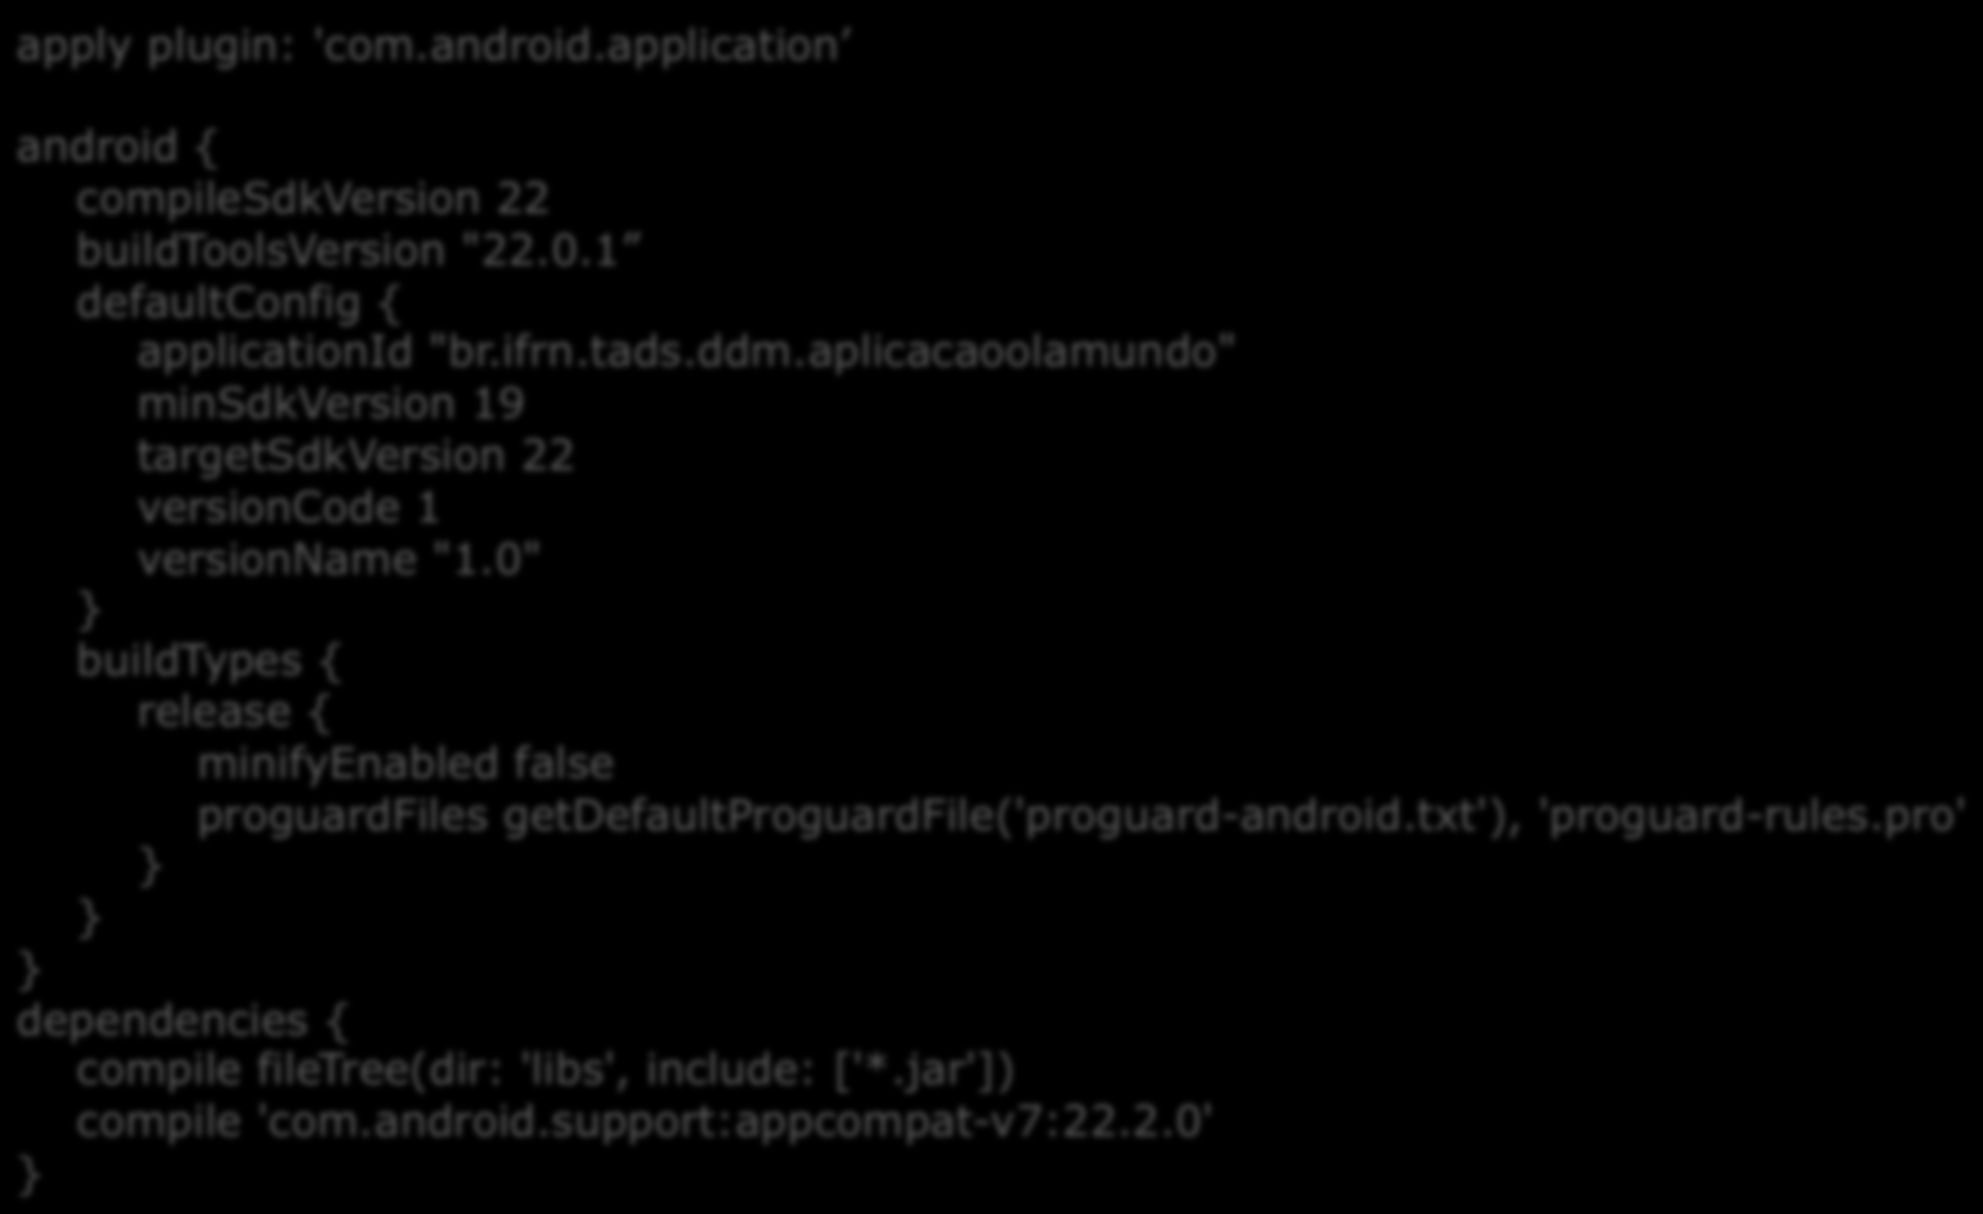 build.gradle (Module: app) apply plugin: 'com.android.application android { compilesdkversion 22 buildtoolsversion "22.0.1 defaultconfig { applicationid "br.ifrn.tads.ddm.